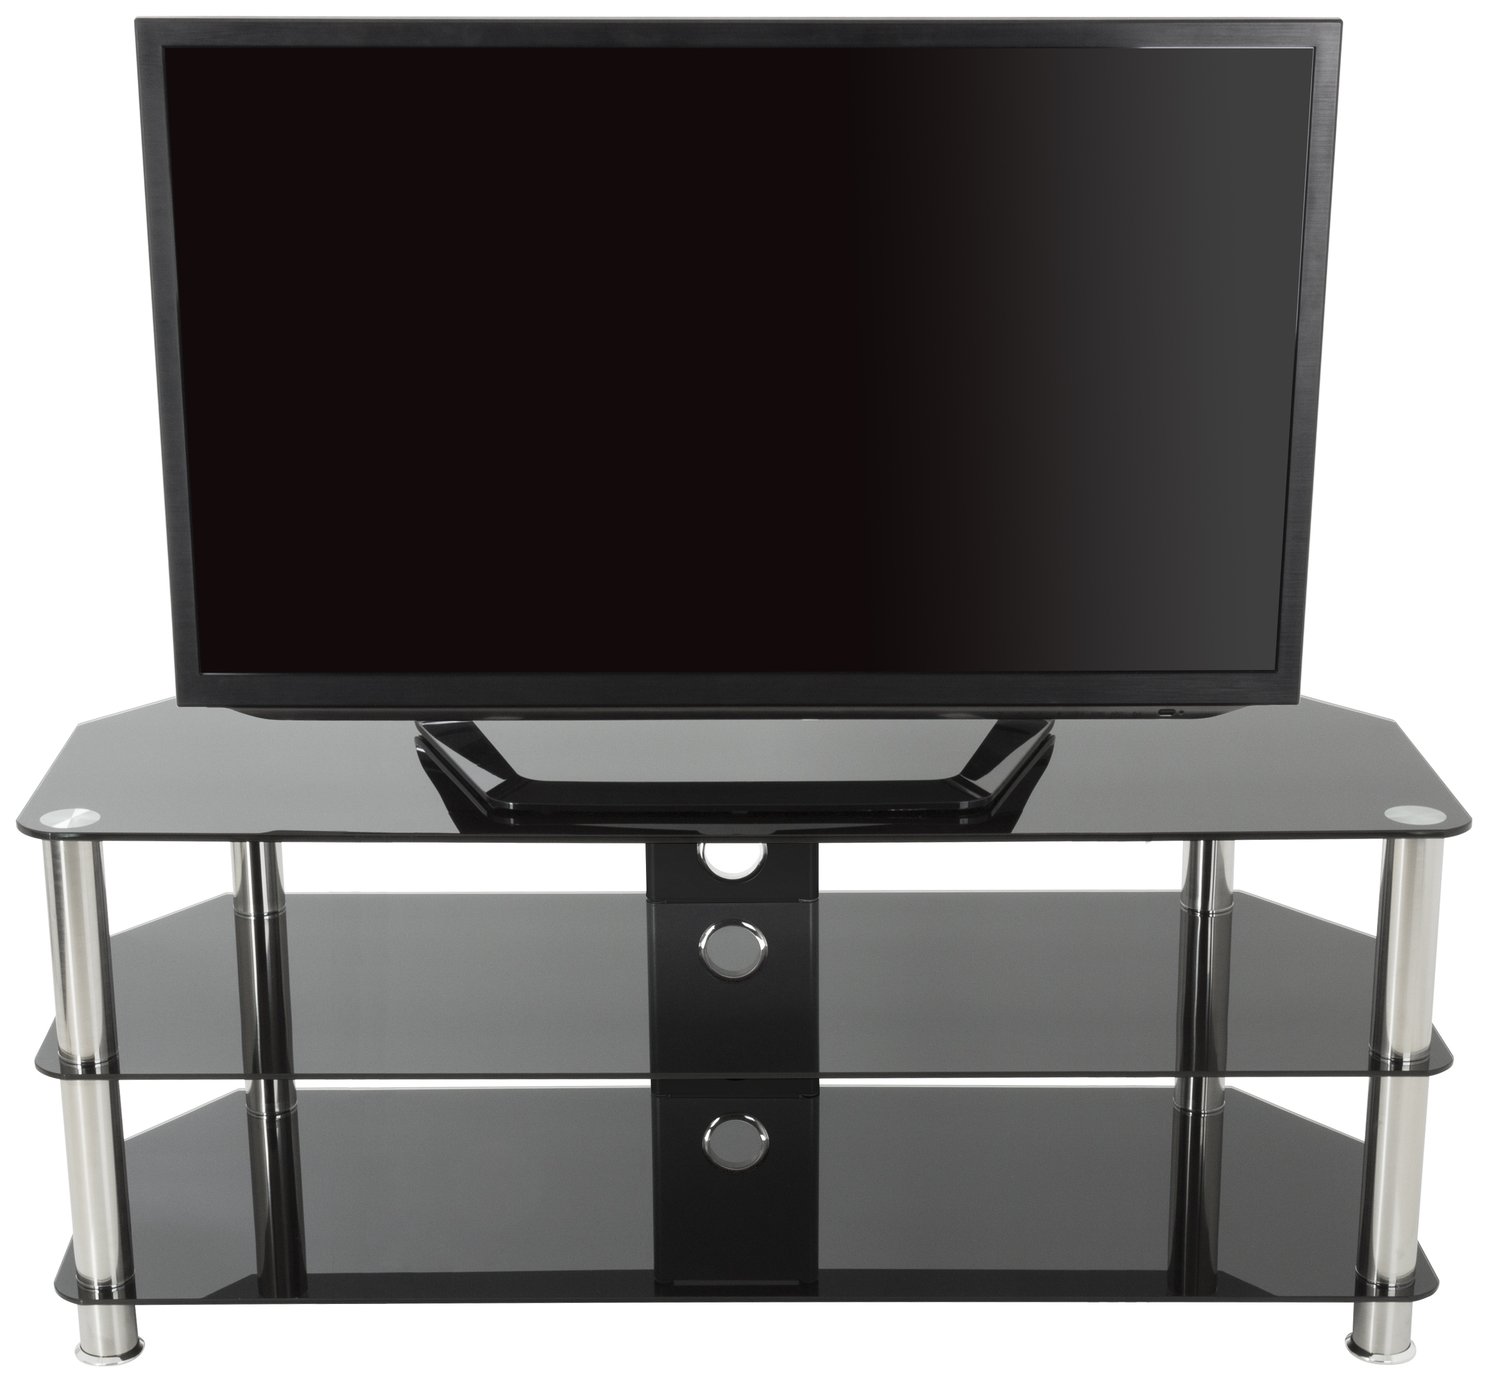 AVF Classic Up to 60 Inch TV Stand - Black